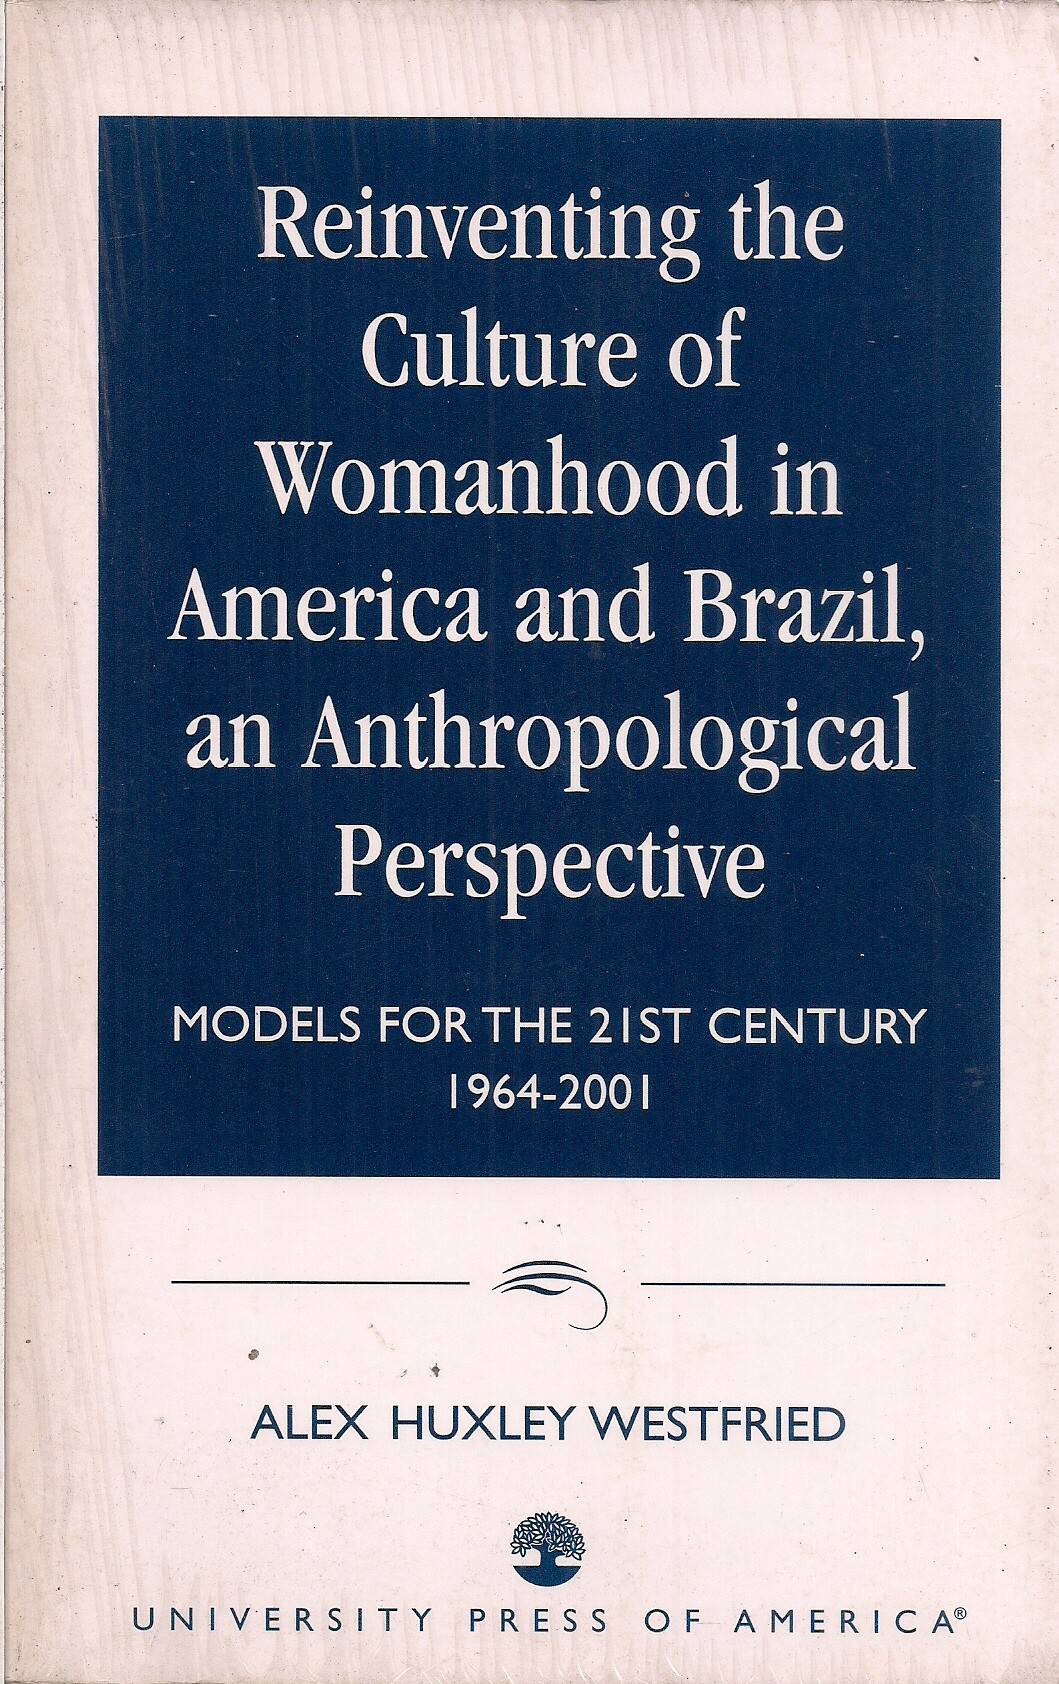 Foto 1 - Reinventing the Culture of Womanhood in America and Brazil, an Anthropological Perspective